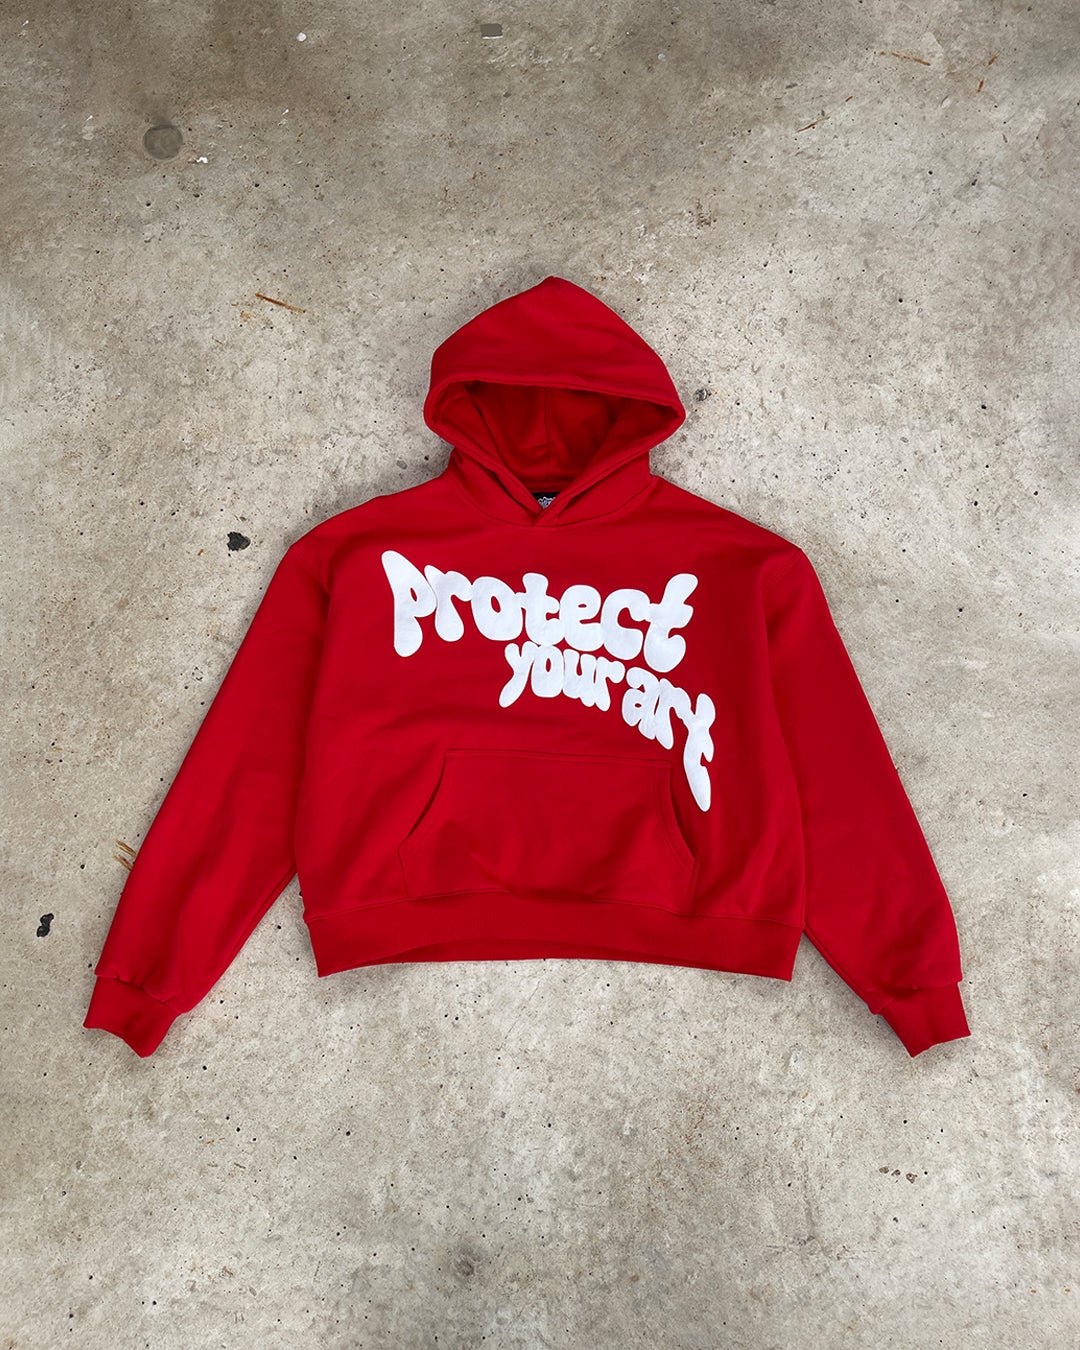 protect your art hoodie red - Statement